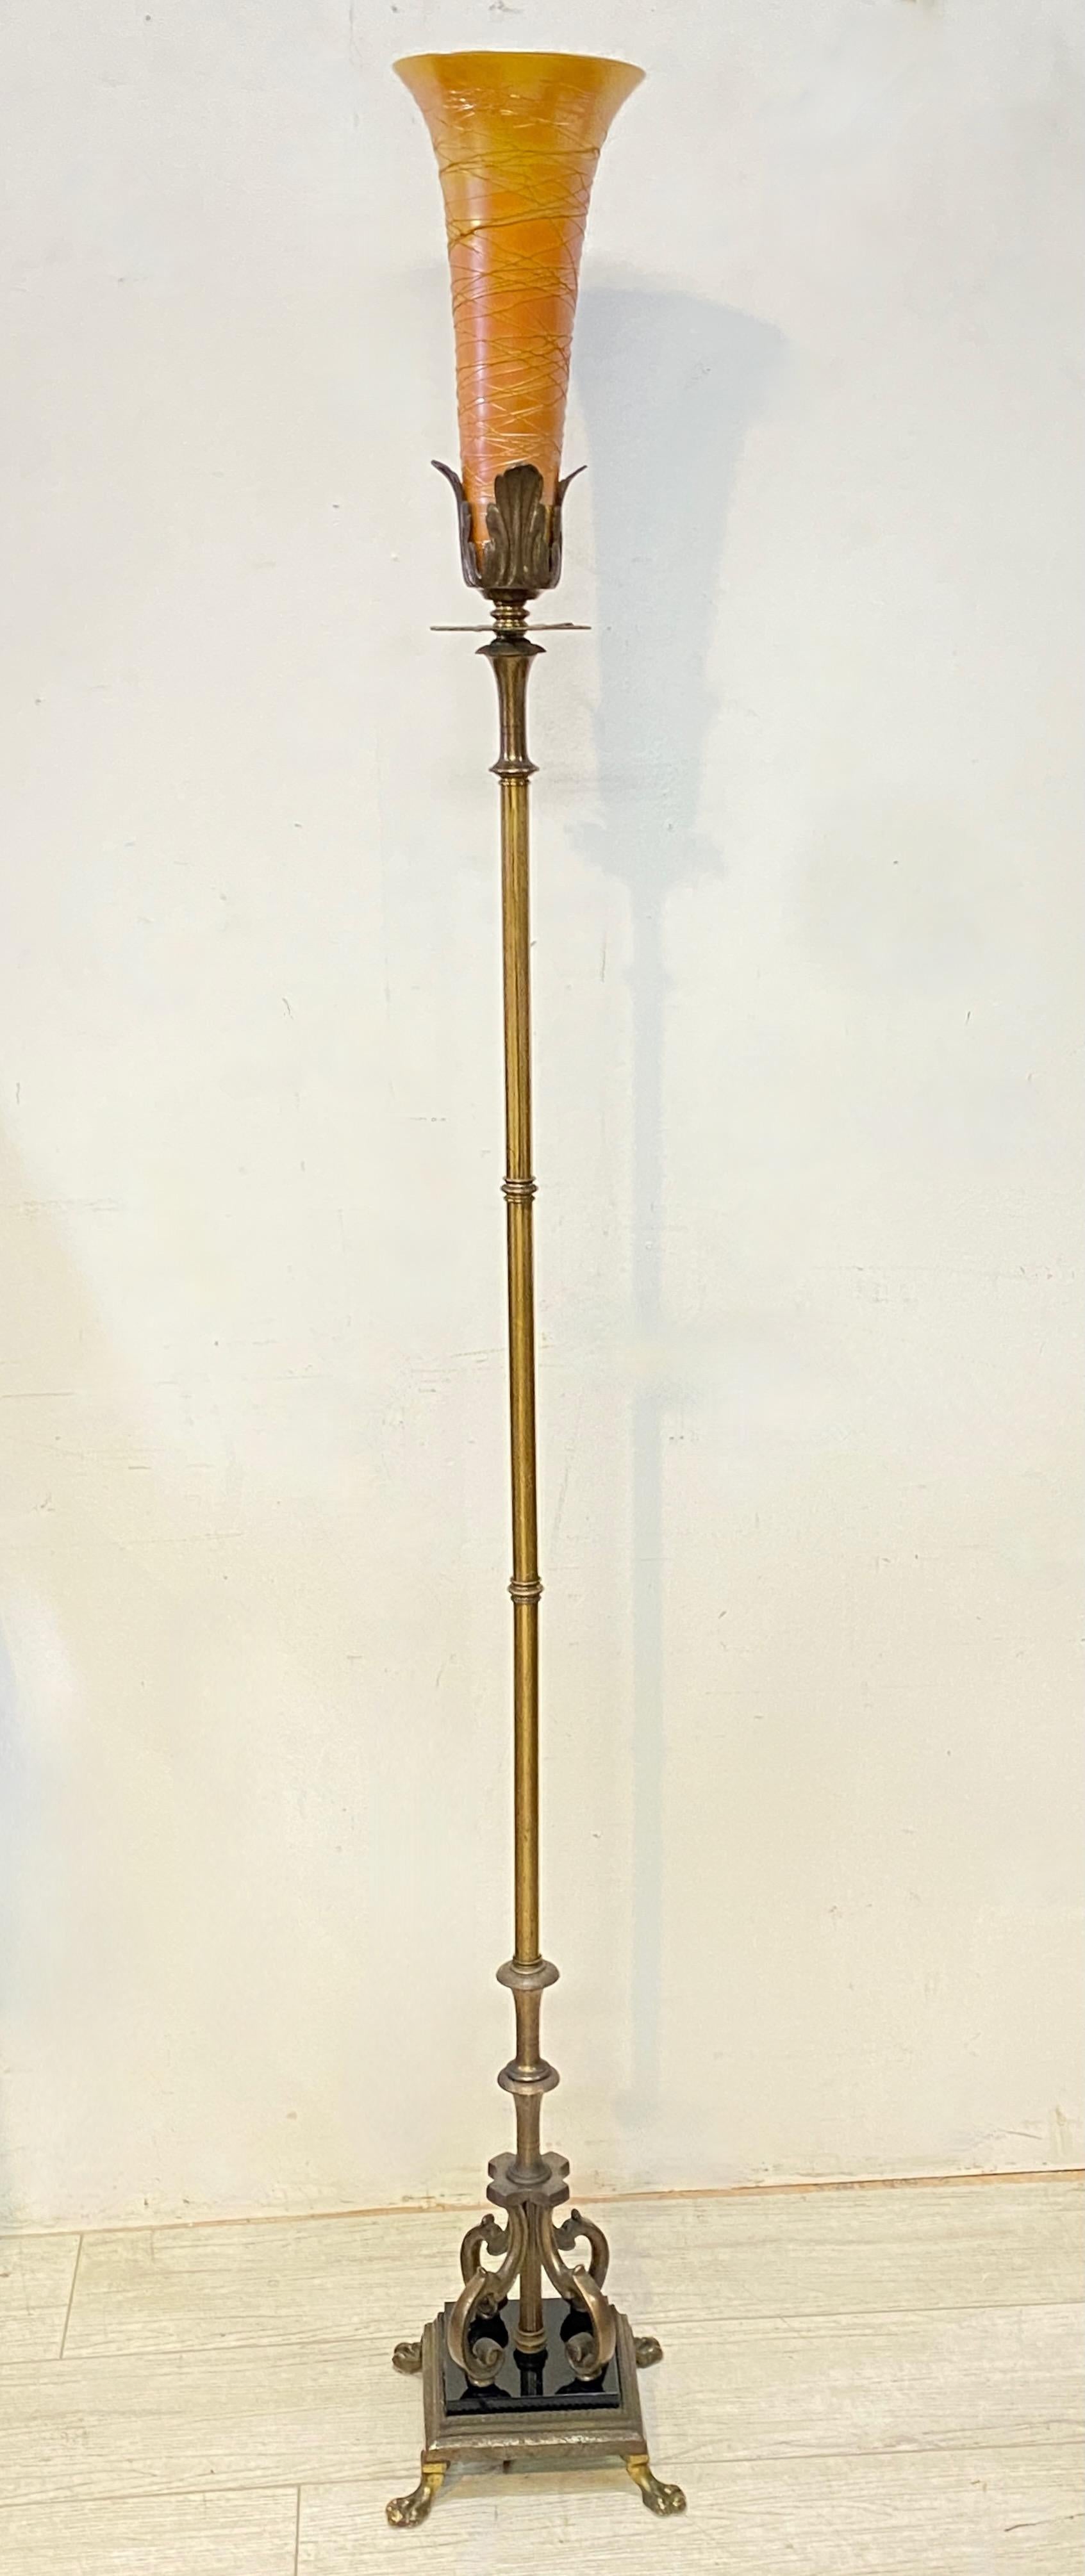 American Art Deco Period Floor Lamp with Durand Art Glass Shade, 1920's In Good Condition For Sale In San Francisco, CA